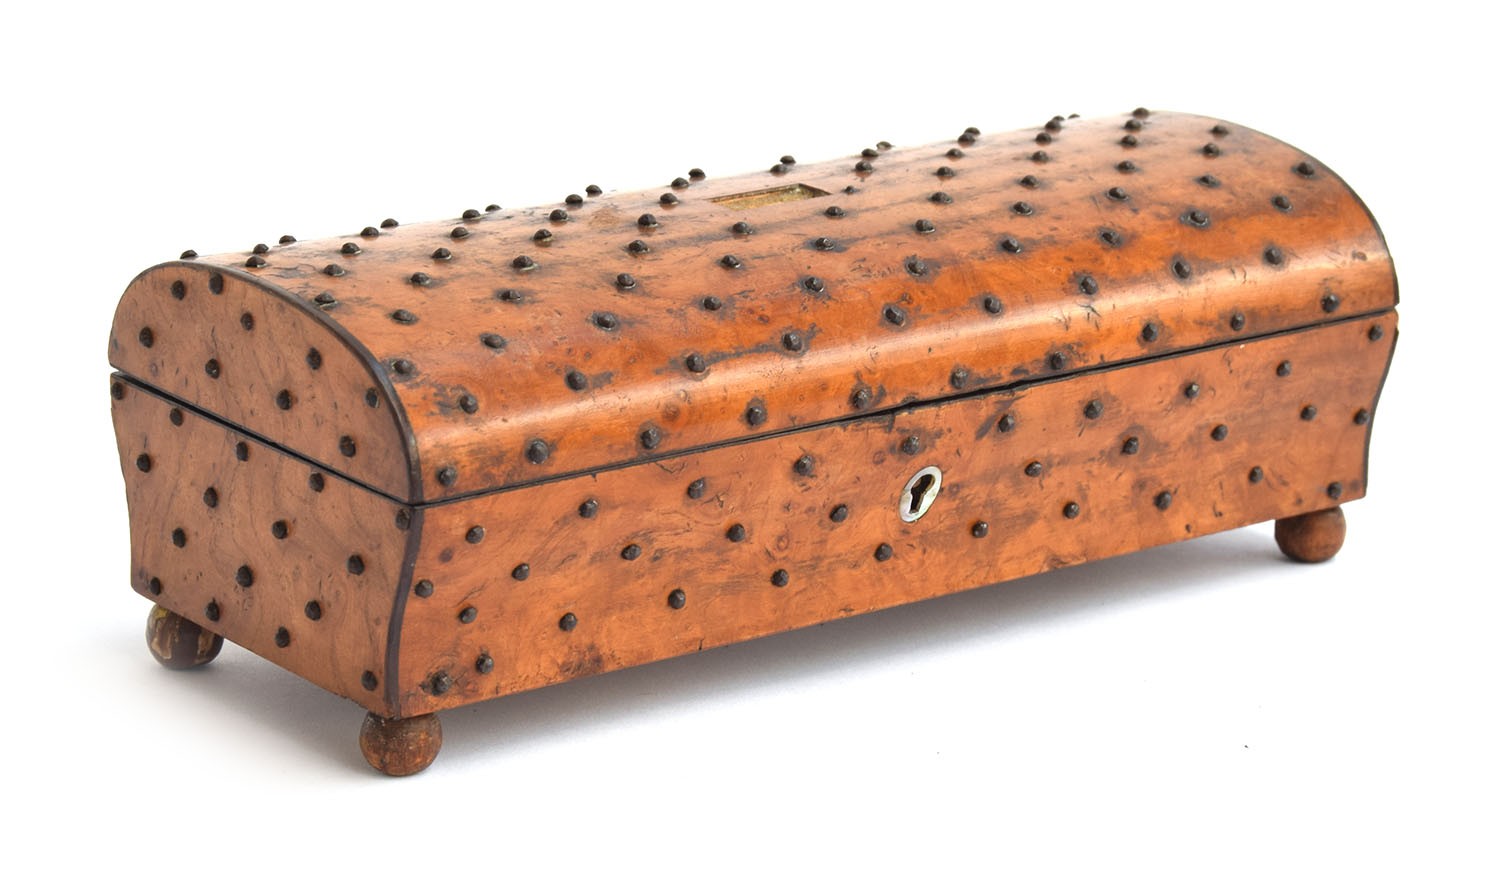 A 19th century burr walnut trinket box, profusely studded with steel pins, mother of pearl inlay